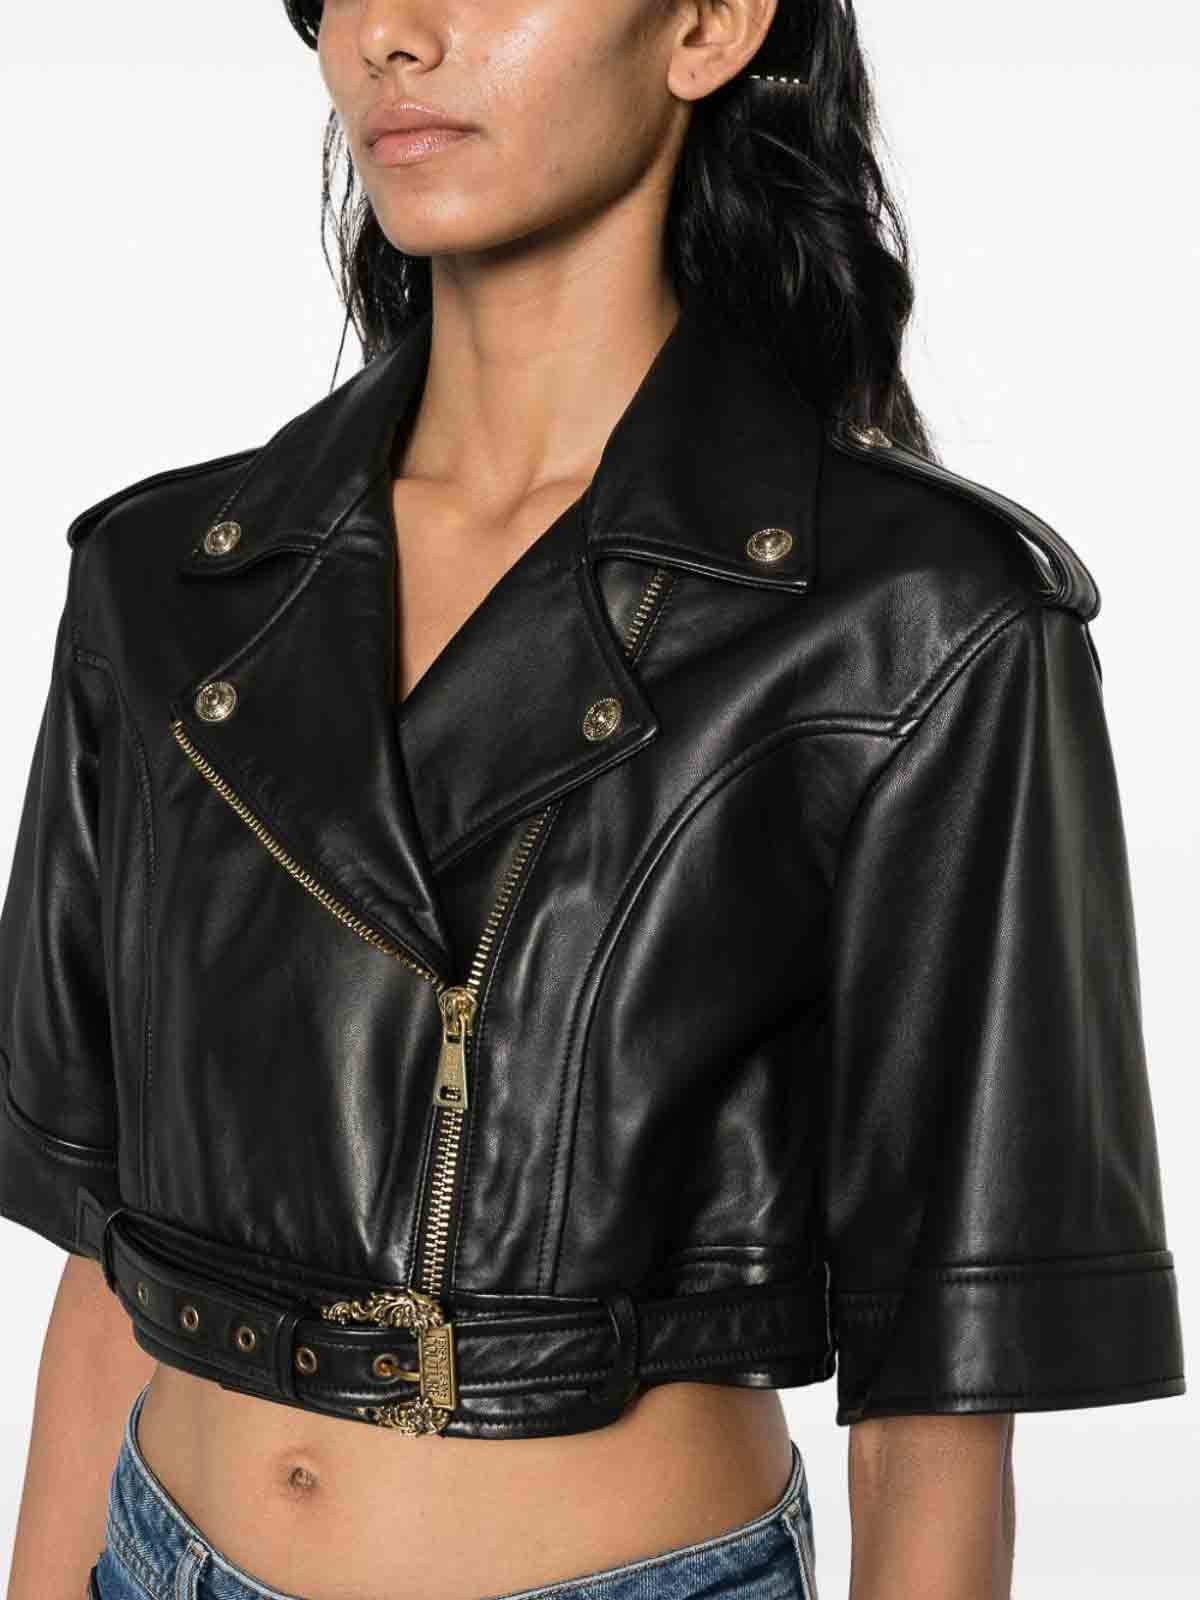 Shop Versace Jeans Couture Hardware Leather Jacket In Black